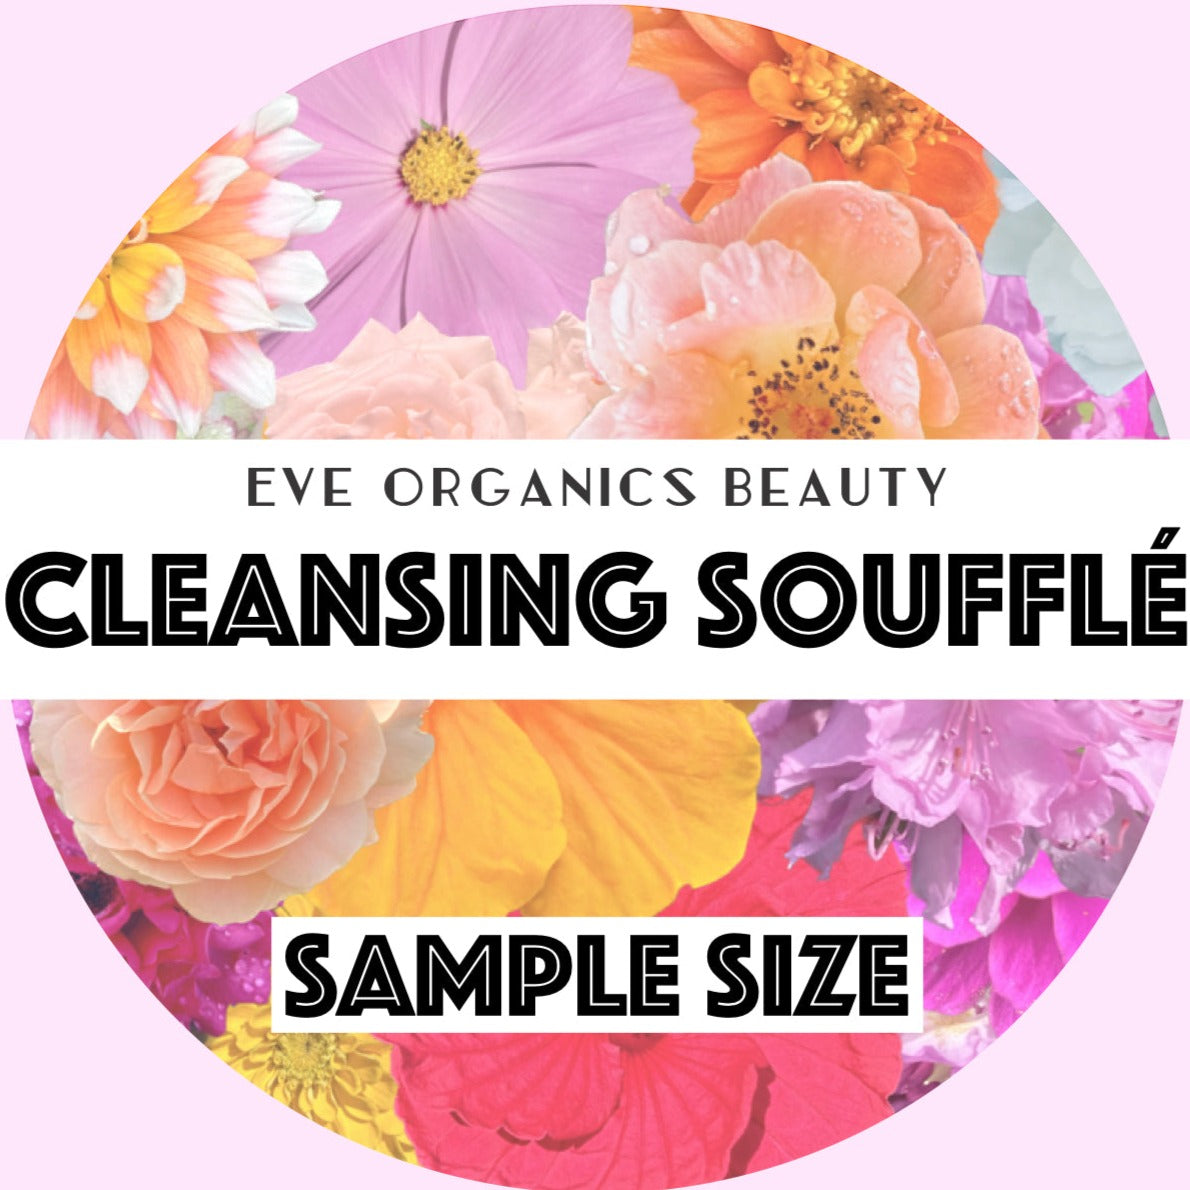 SAMPLE SIZE CLEANSING SOUFFLE 